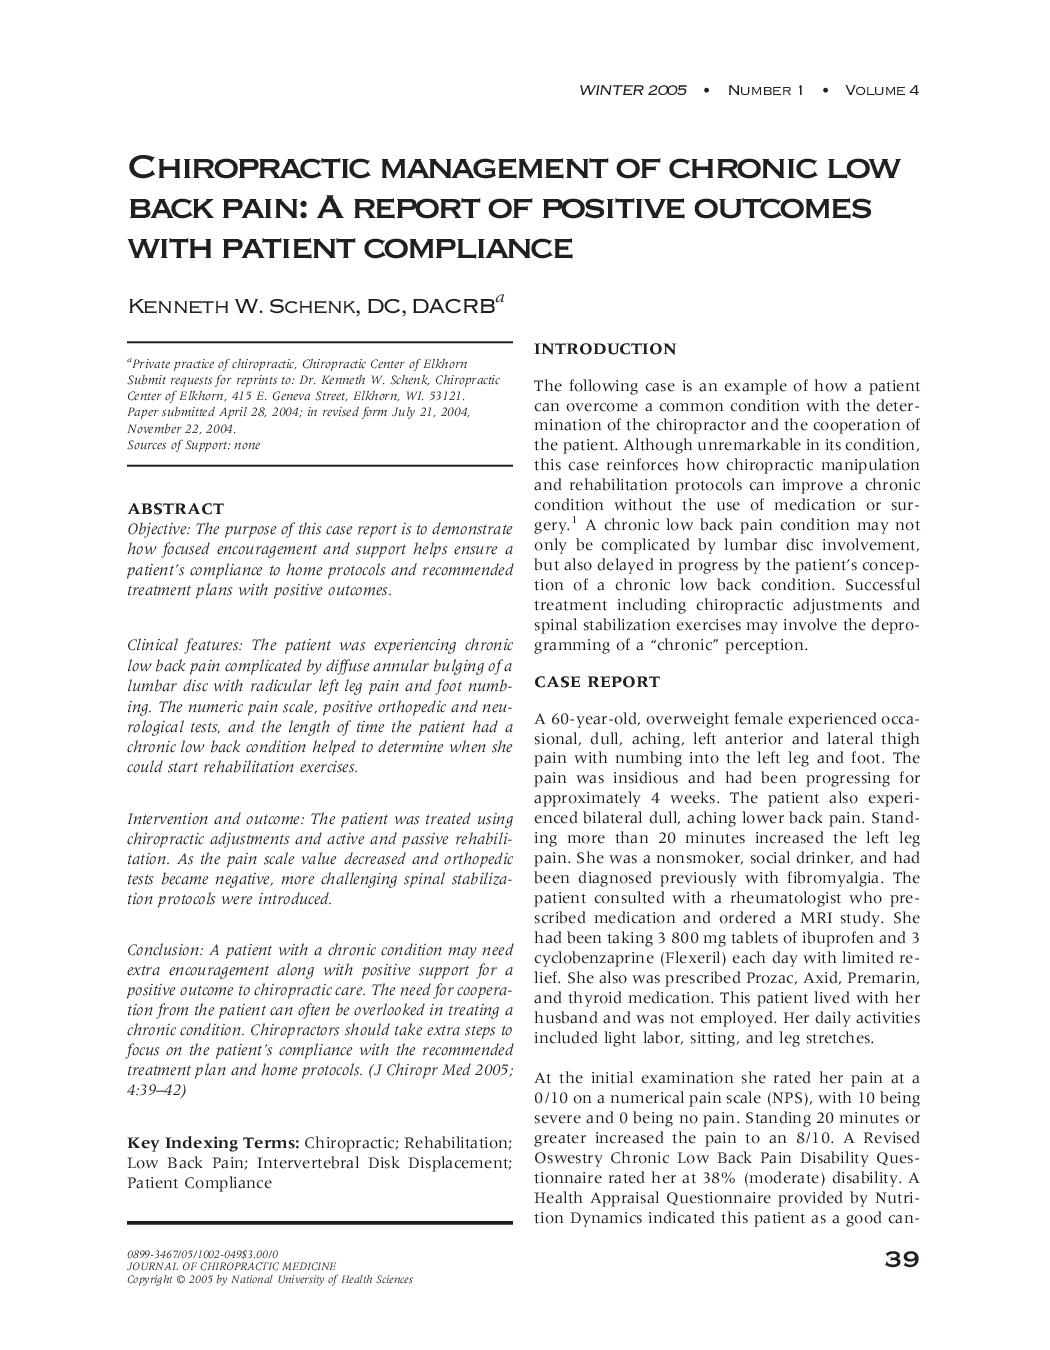 Chiropractic Management of Chronic Low Back Pain: A Report of Positive Outcomes with Patient Compliance